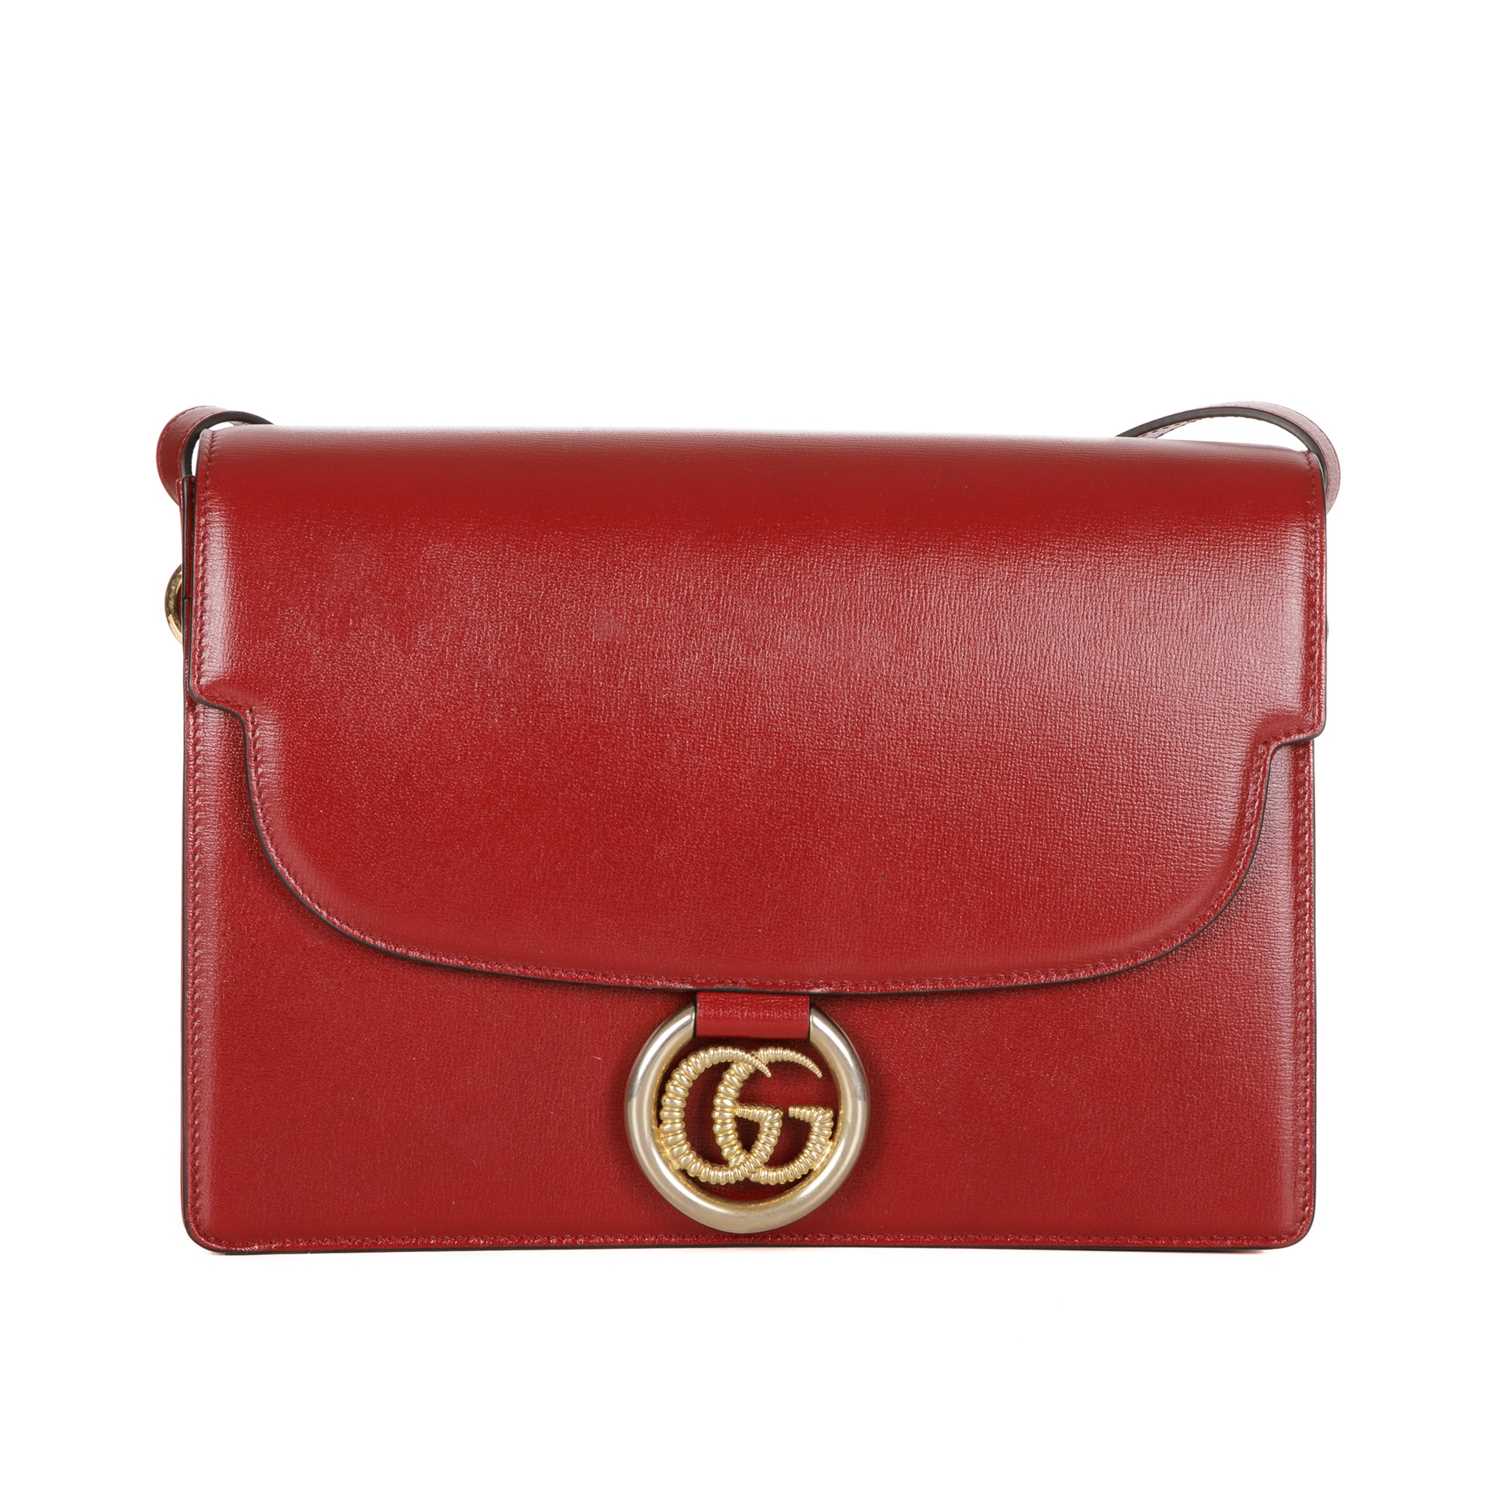 Gucci, a red leather satchel, featuring an adjustable leather shoulder strap, magnetic flap